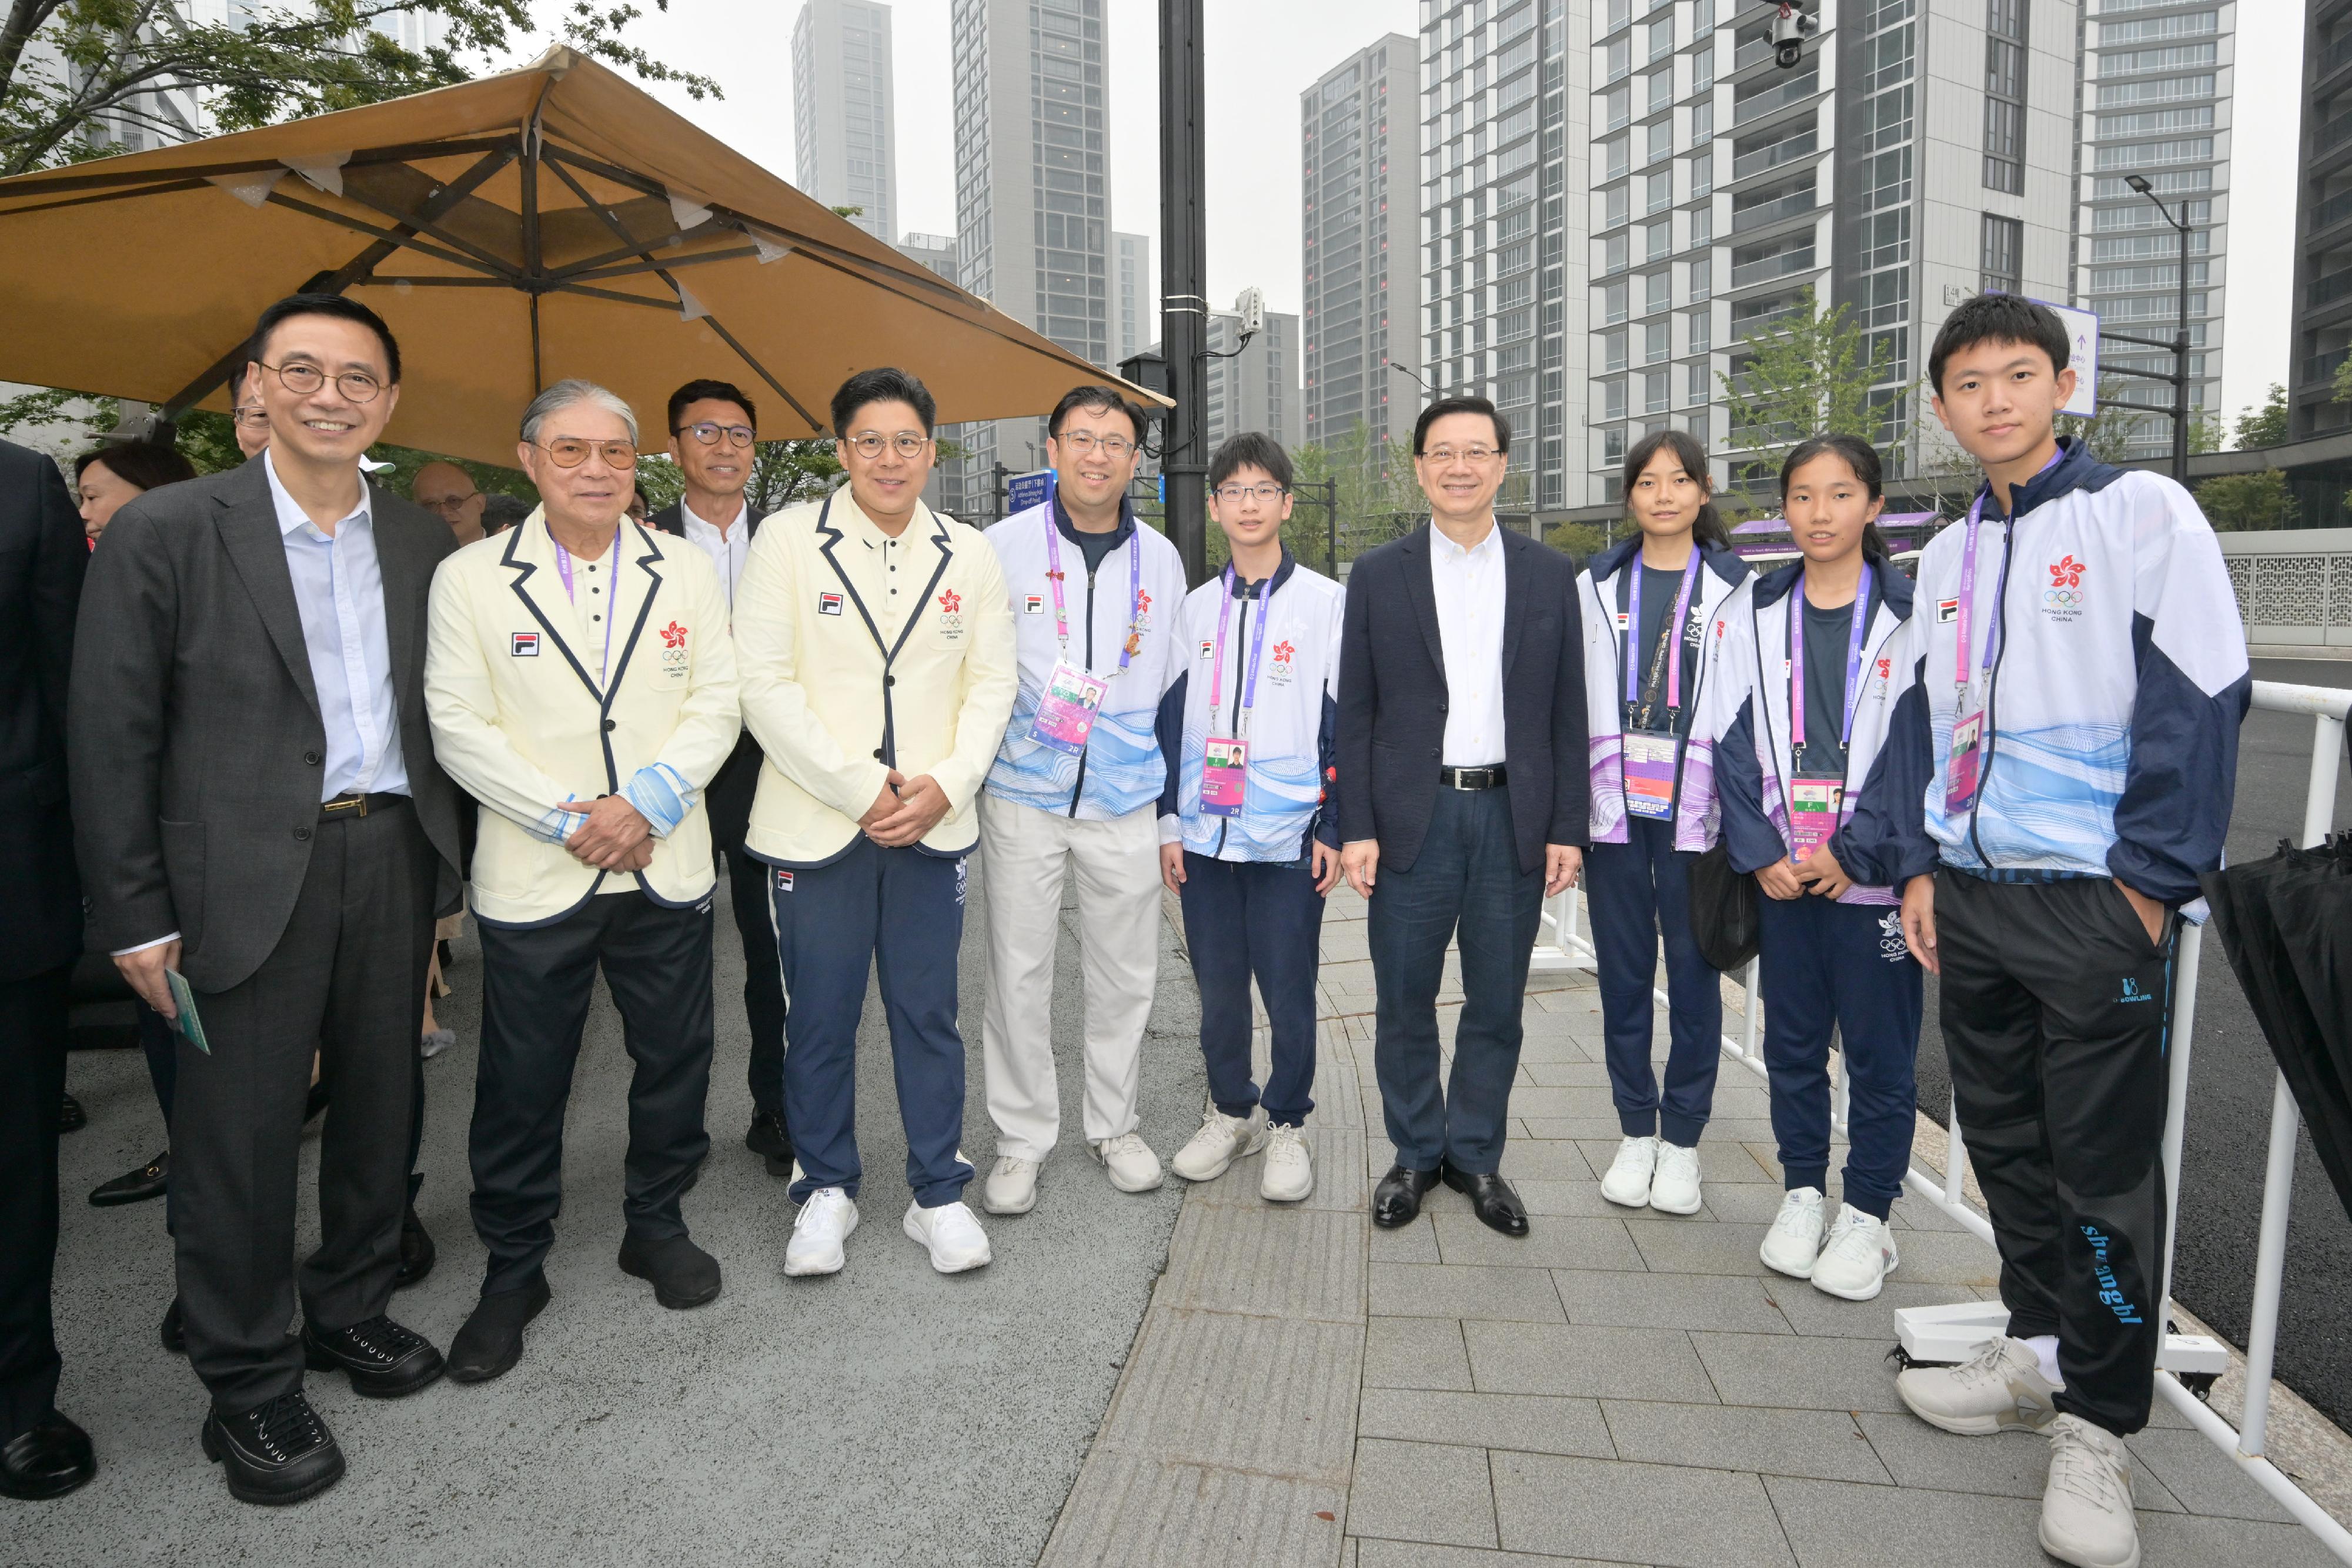 The Chief Executive, Mr John Lee, led a delegation of the Hong Kong Special Administrative Region Government to attend the opening ceremony of the 19th Asian Games Hangzhou (Asian Games) today (September 22). Photo shows Mr Lee (fourth right); the Secretary for Culture, Sports and Tourism, Mr Kevin Yeung (first left); the President of the Sports Federation & Olympic Committee of Hong Kong, China, Mr Timothy Fok (second left); and the Chef de Mission of the Hong Kong, China Delegation to the Asian Games, Mr Kenneth Fok (third left), with Hong Kong athletes.
